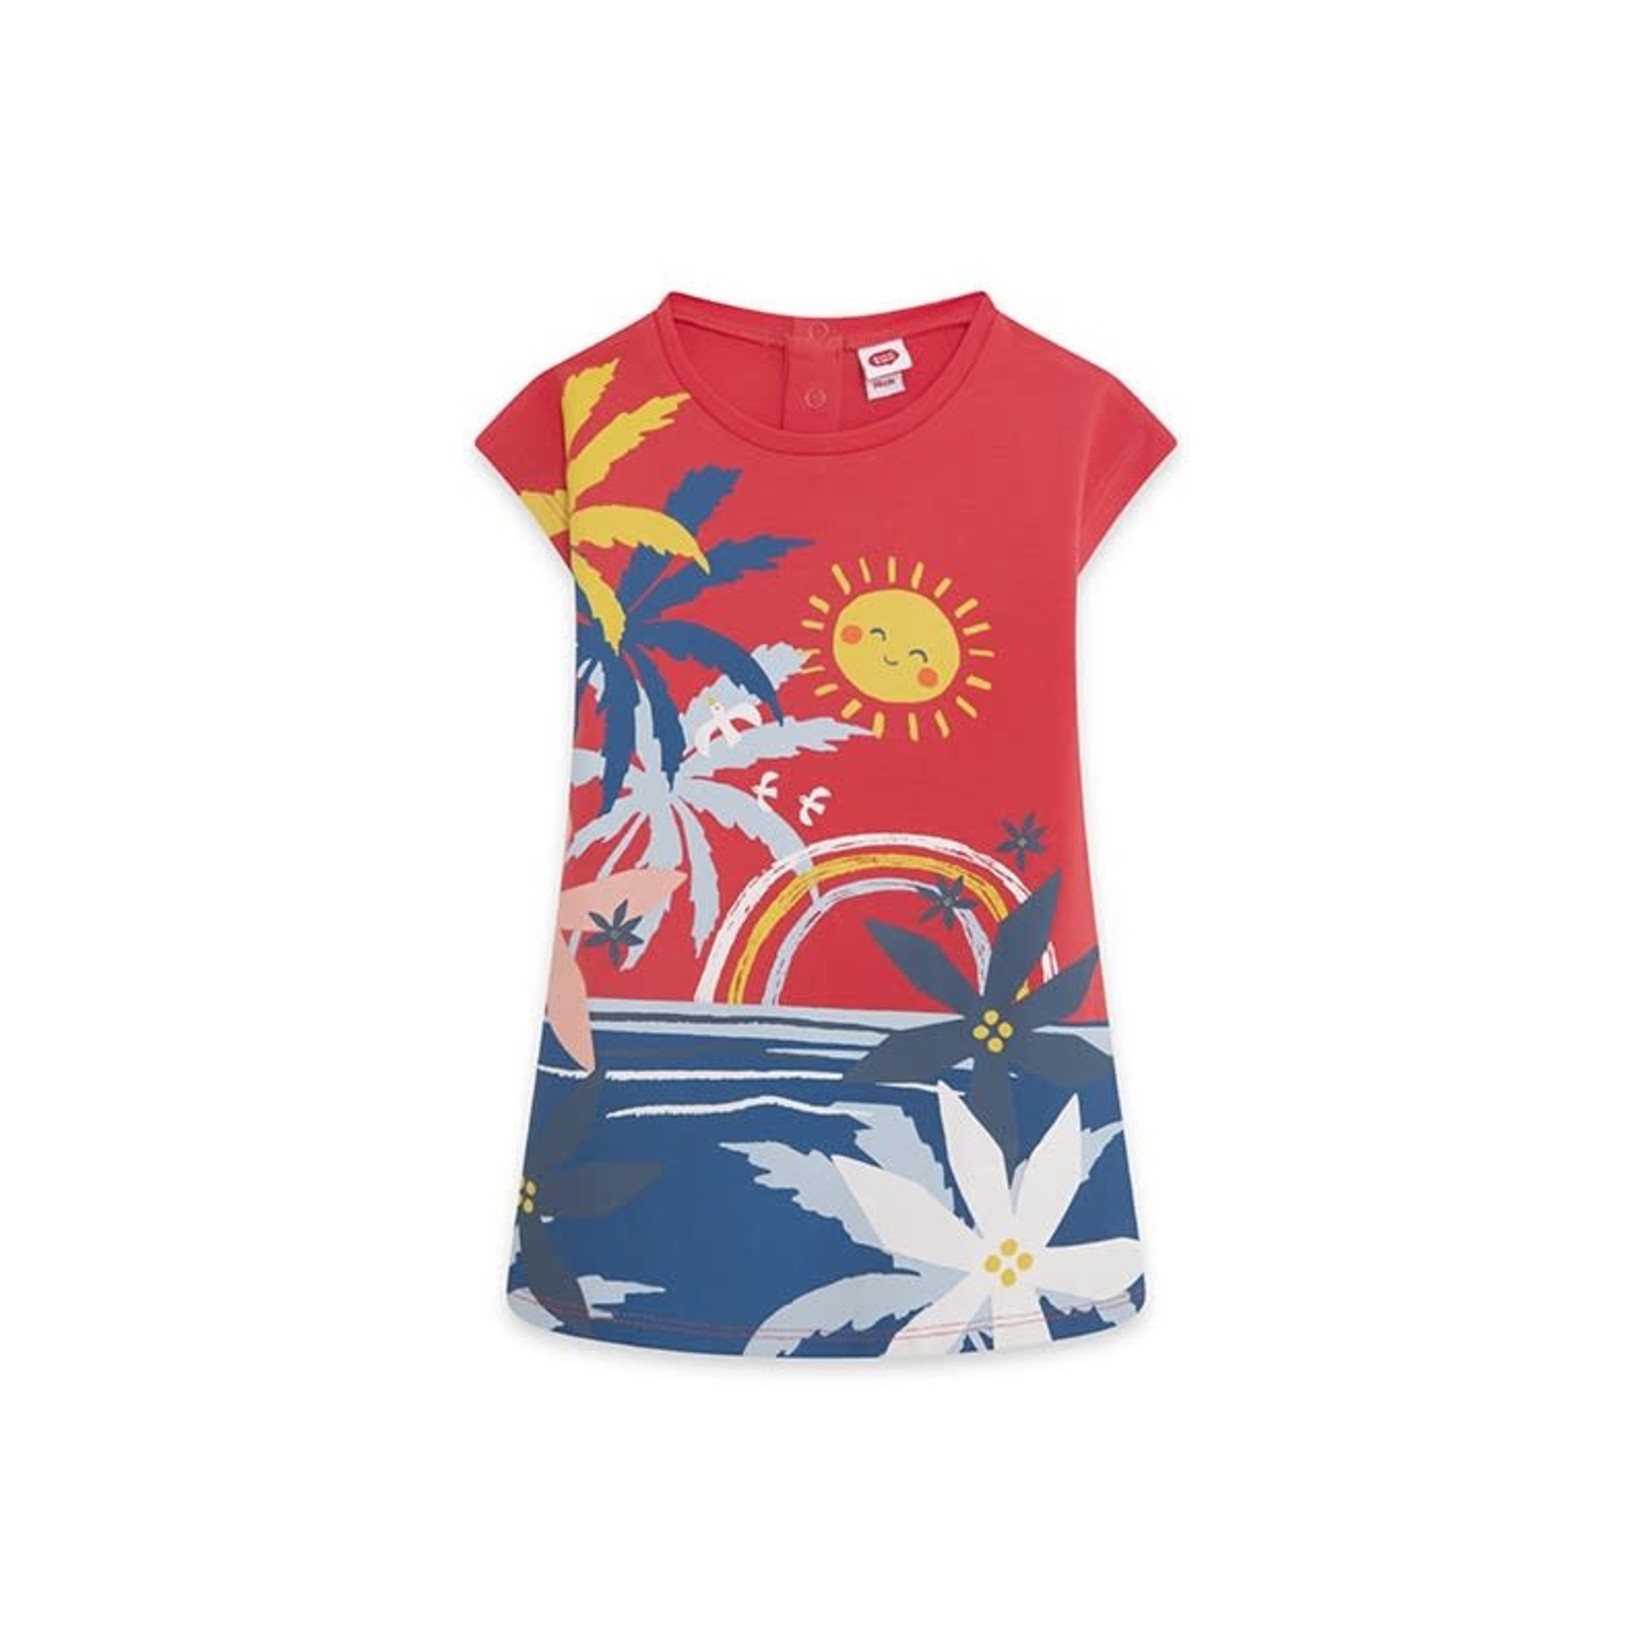 TucTuc TUC TUC - Red-orange jersey dress with tropical scene print 'Enjoy the Sun'